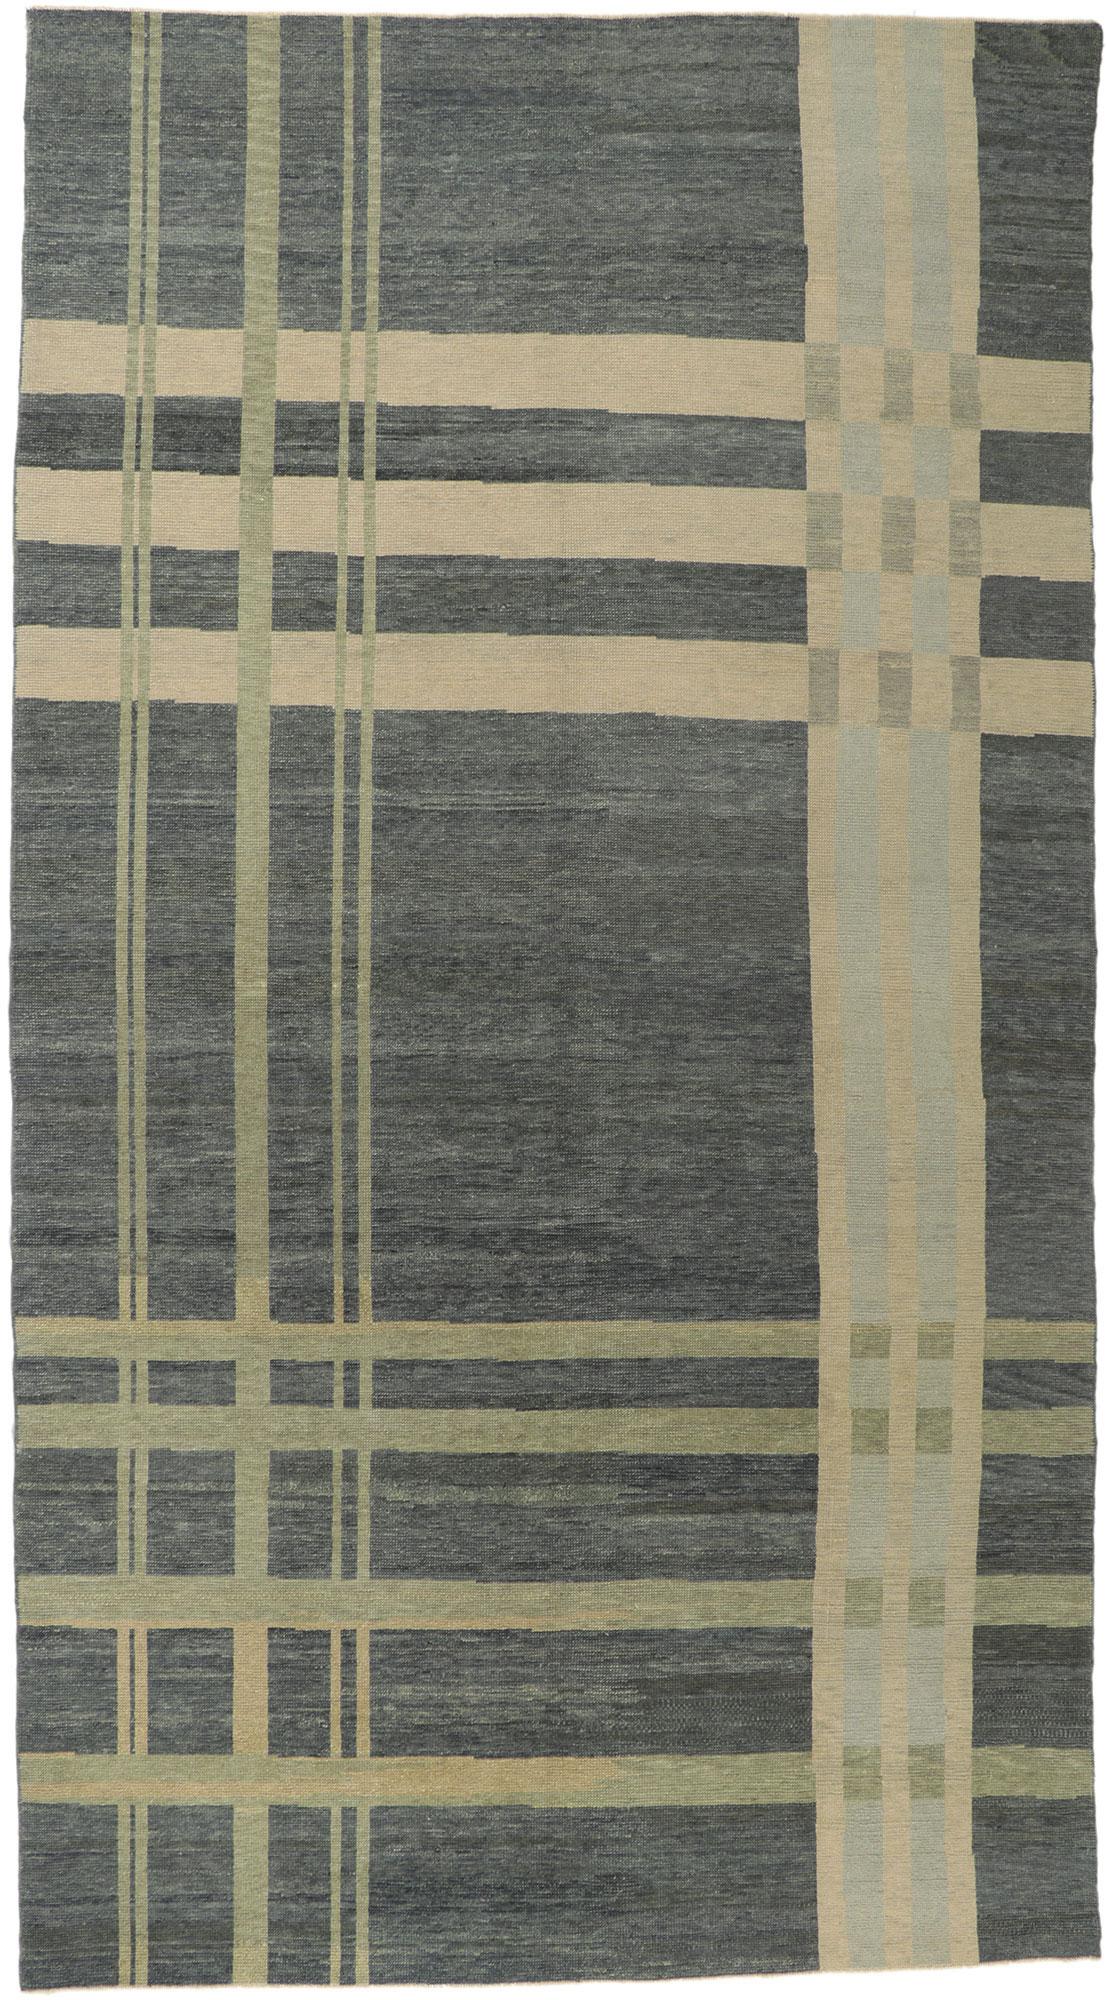 New Modern Plaid Tartan Rug with Ivy League Style For Sale 2